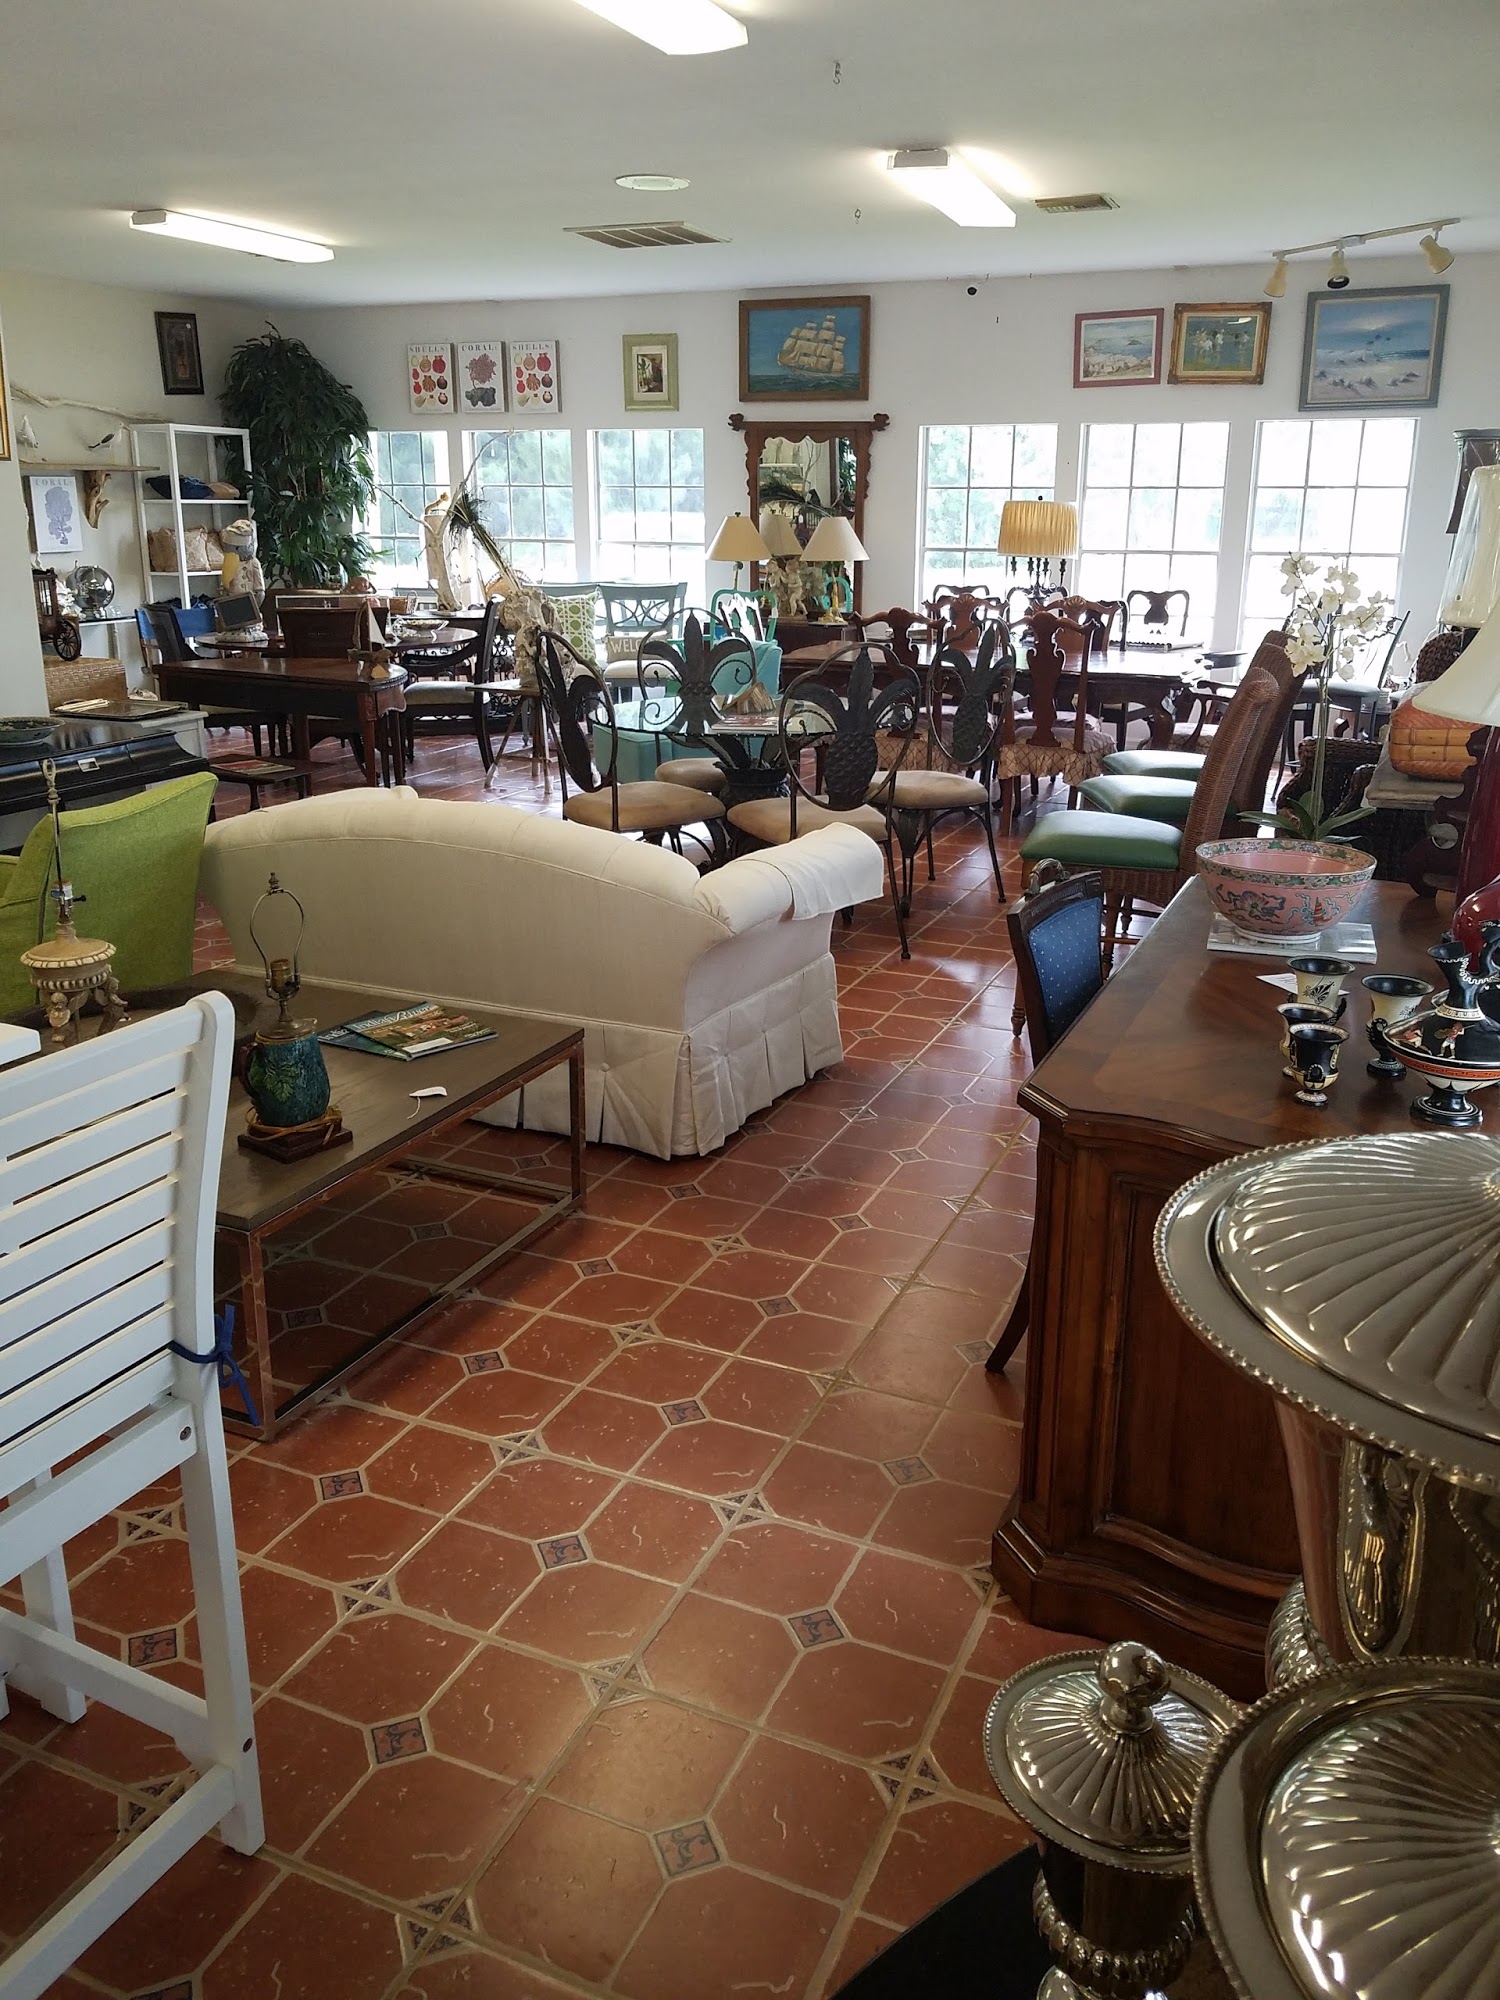 Fantastic Finds Consignments Furniture and Art Gallery